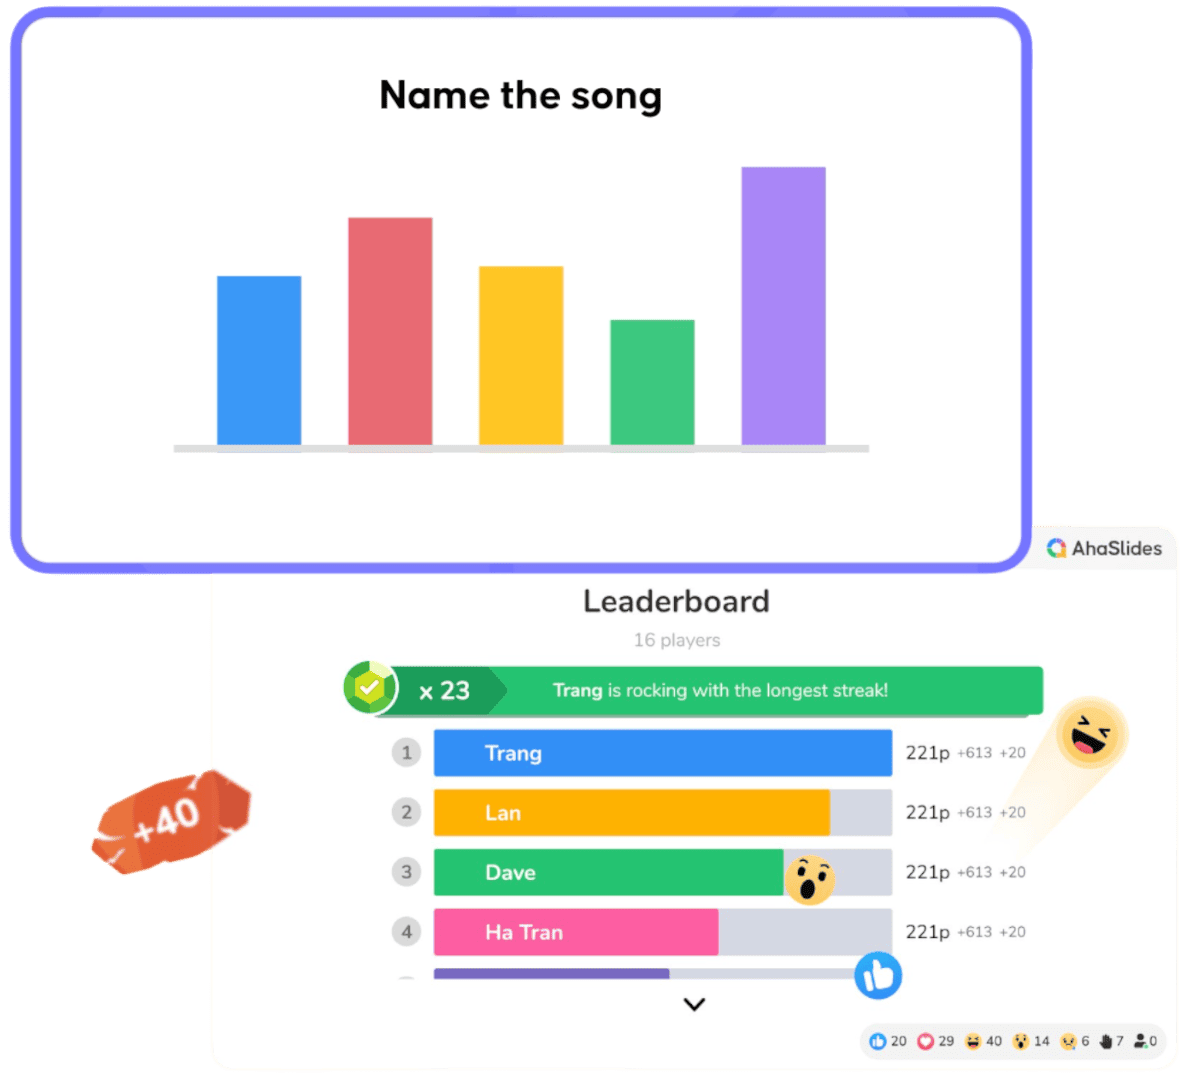 How to make a live quiz with AhaSlides